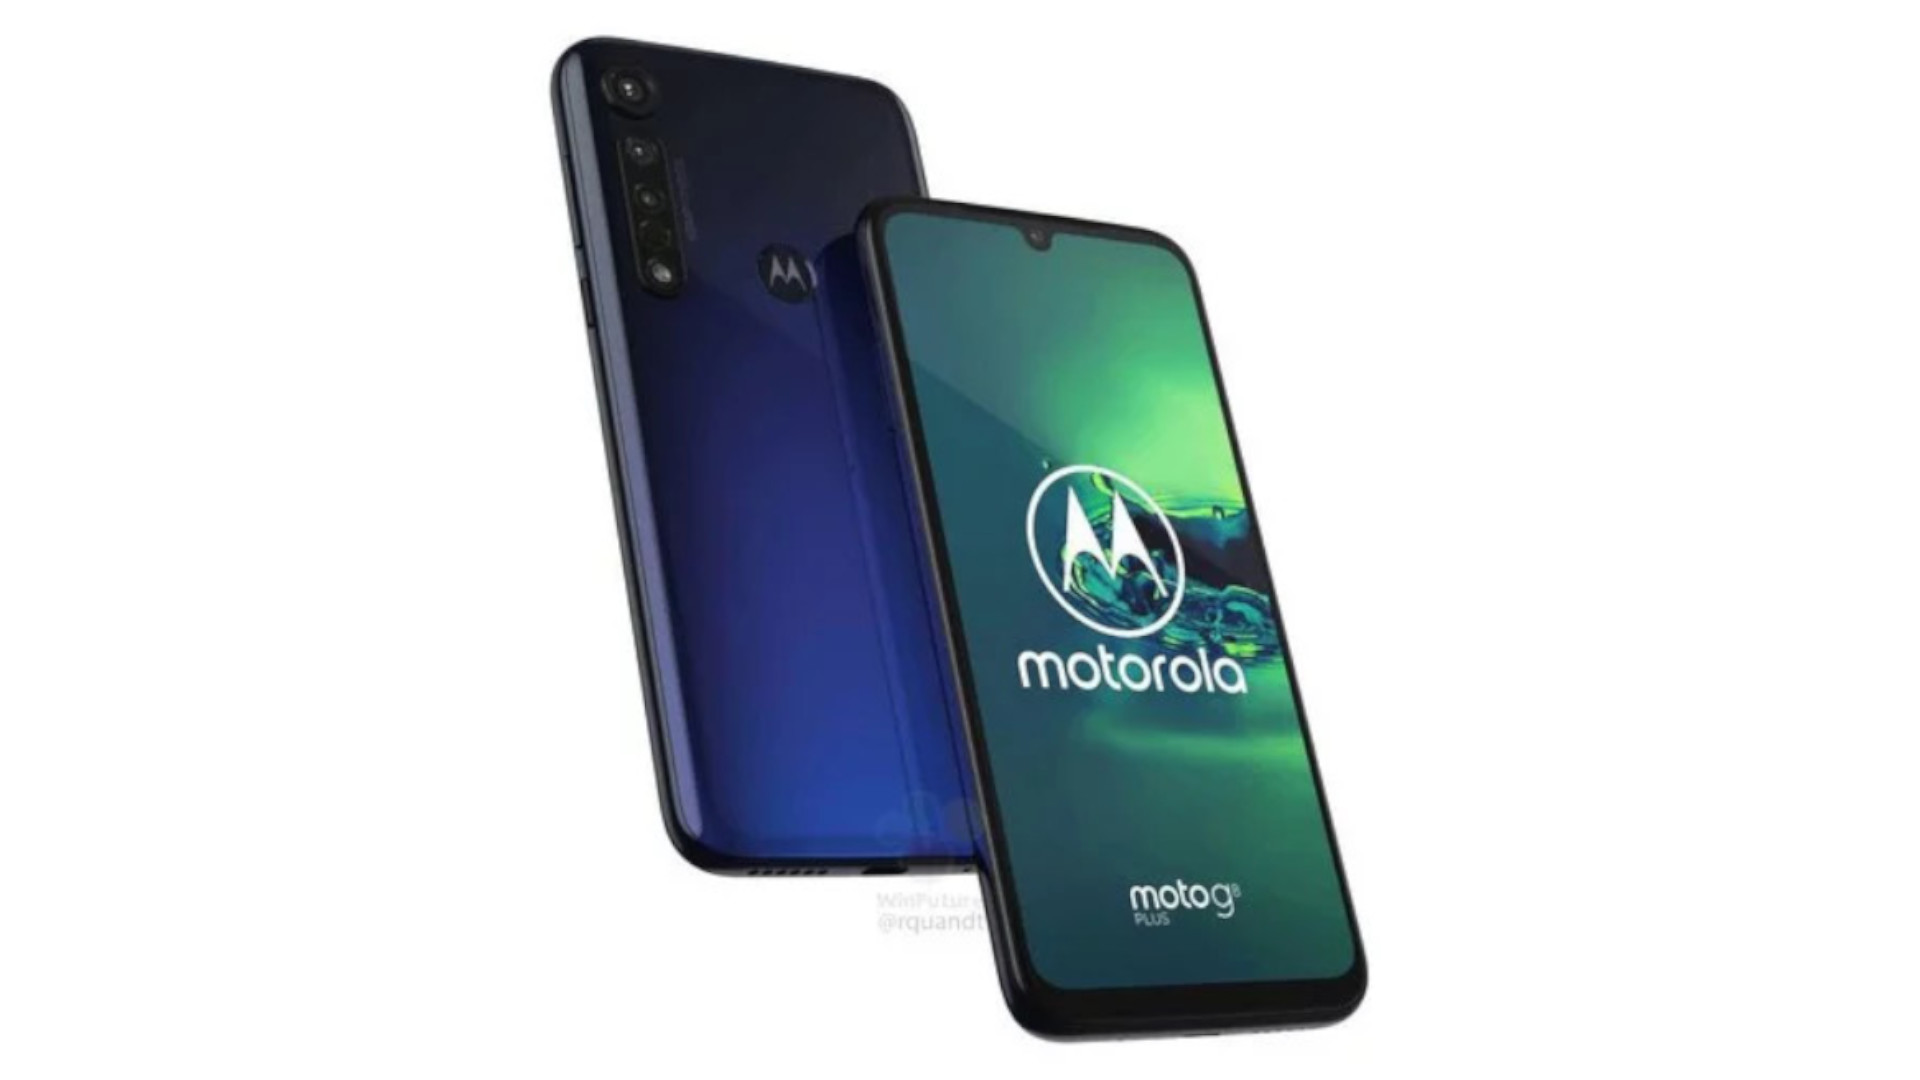 Motorola G8 Plus Blue front and back WinFuture